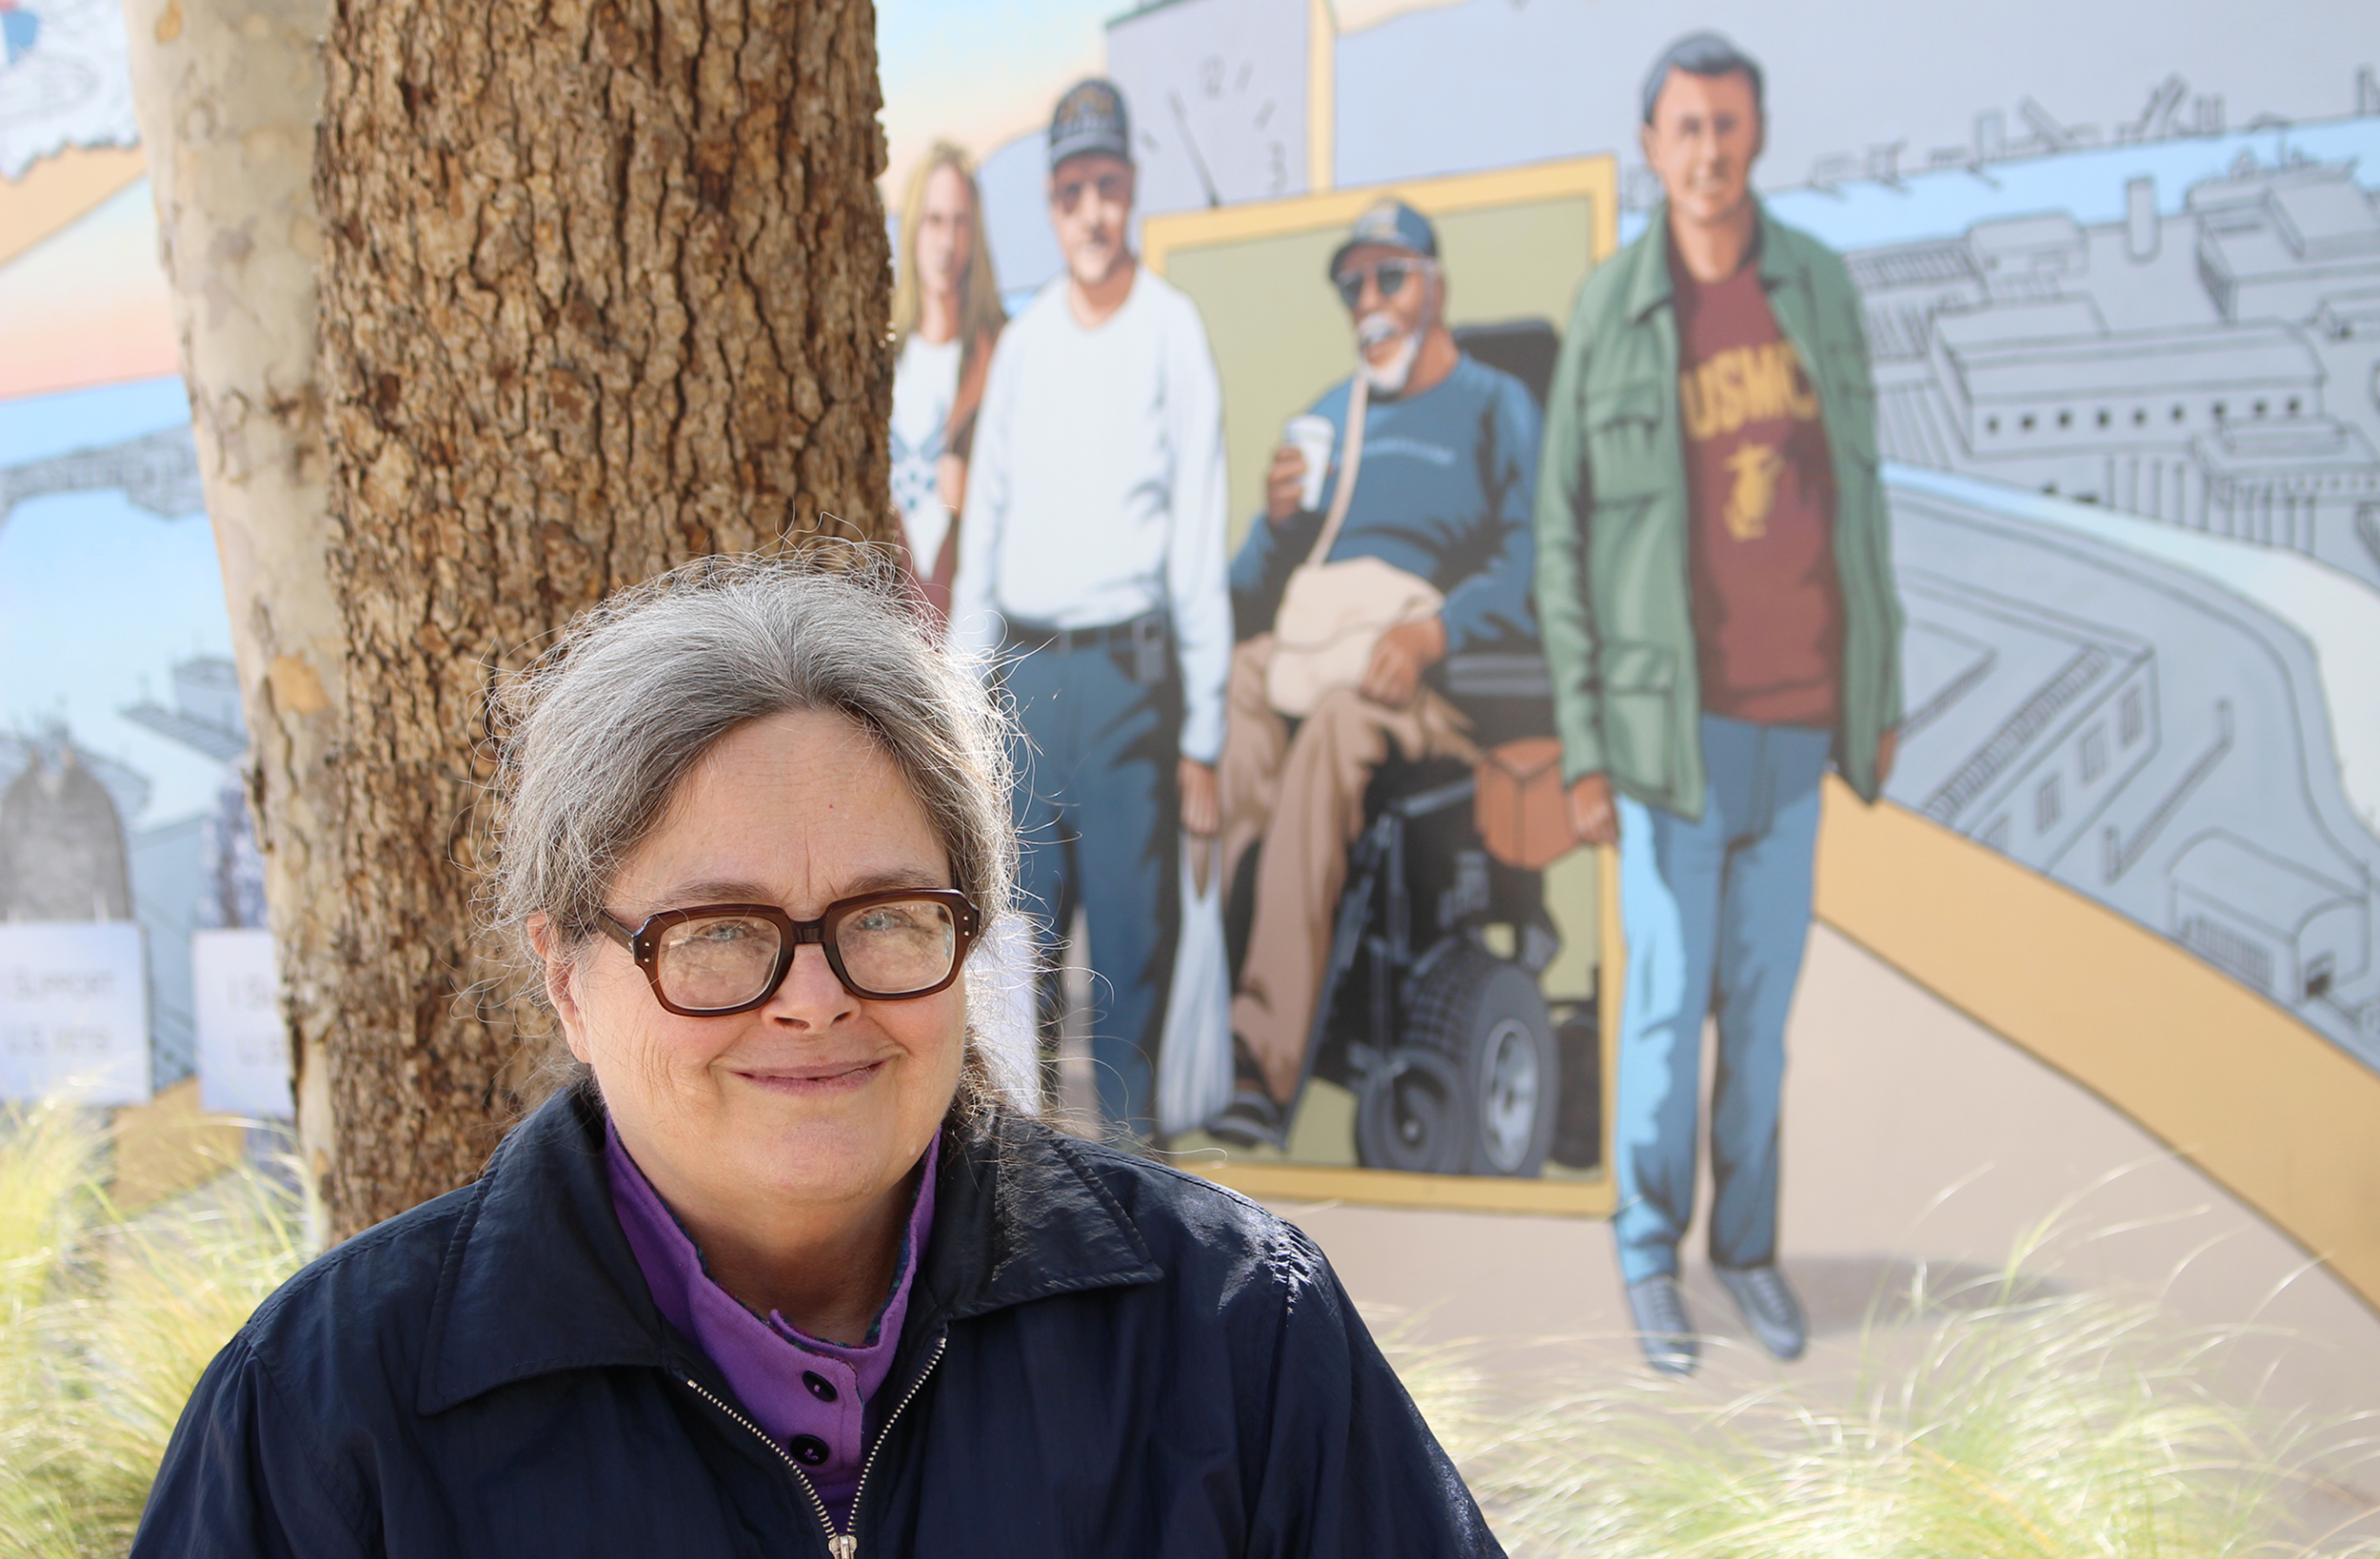 A woman sits in front of a tree and a mural of several people.